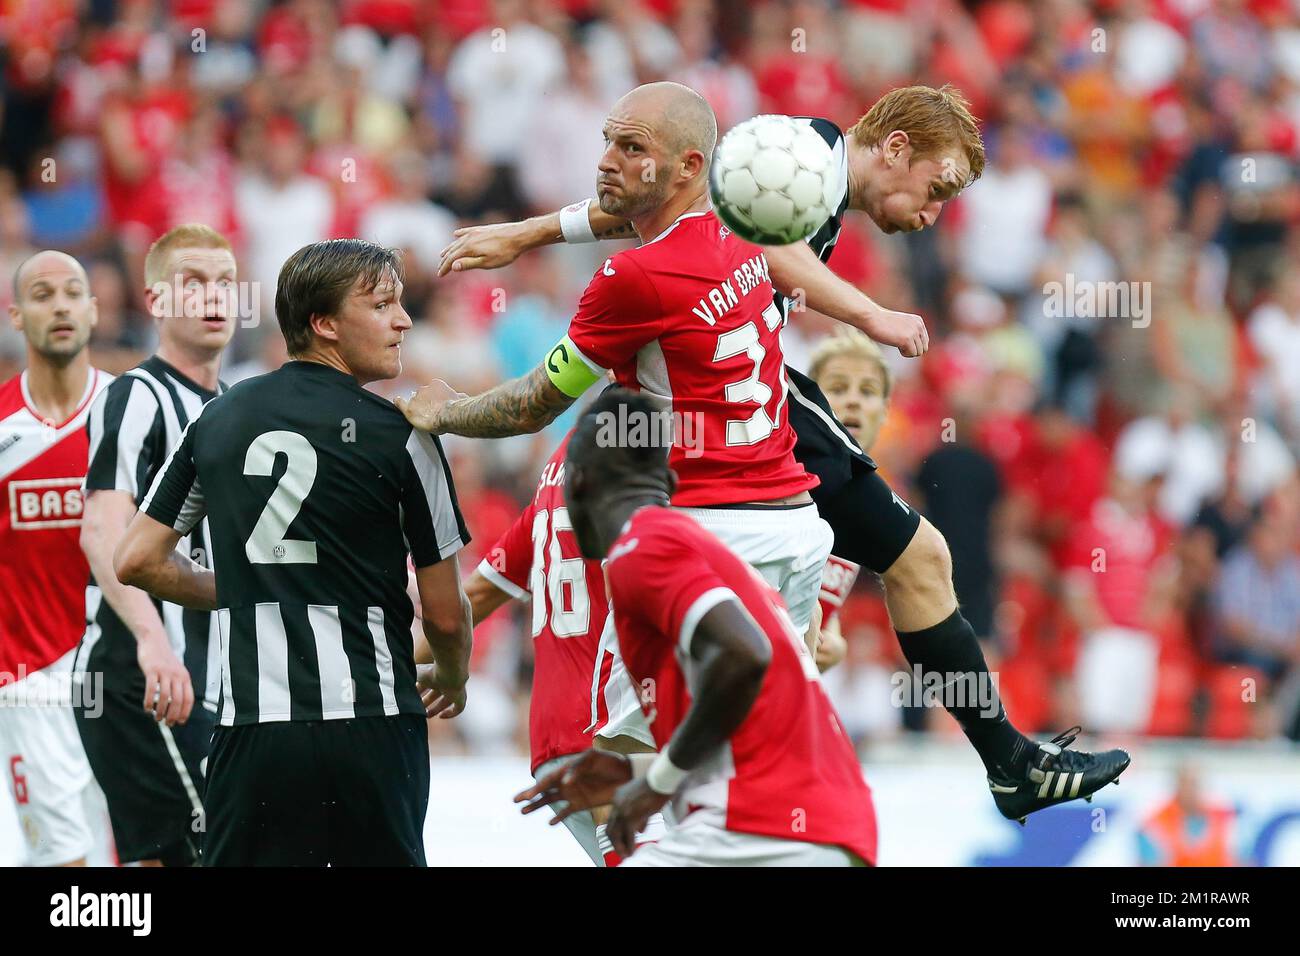 Standard's Jelle Van Damme and KR Reykjavikís Aron Bjarki Josepsson fight for the ball during the return leg game of the second preliminary round of Europa League with Belgian first division soccer team Standard de Liege against Icelandic team KR Reykjavik, Thursday 25 July 2013, in Liege. Standard won the first leg with a 1-3 score.  Stock Photo